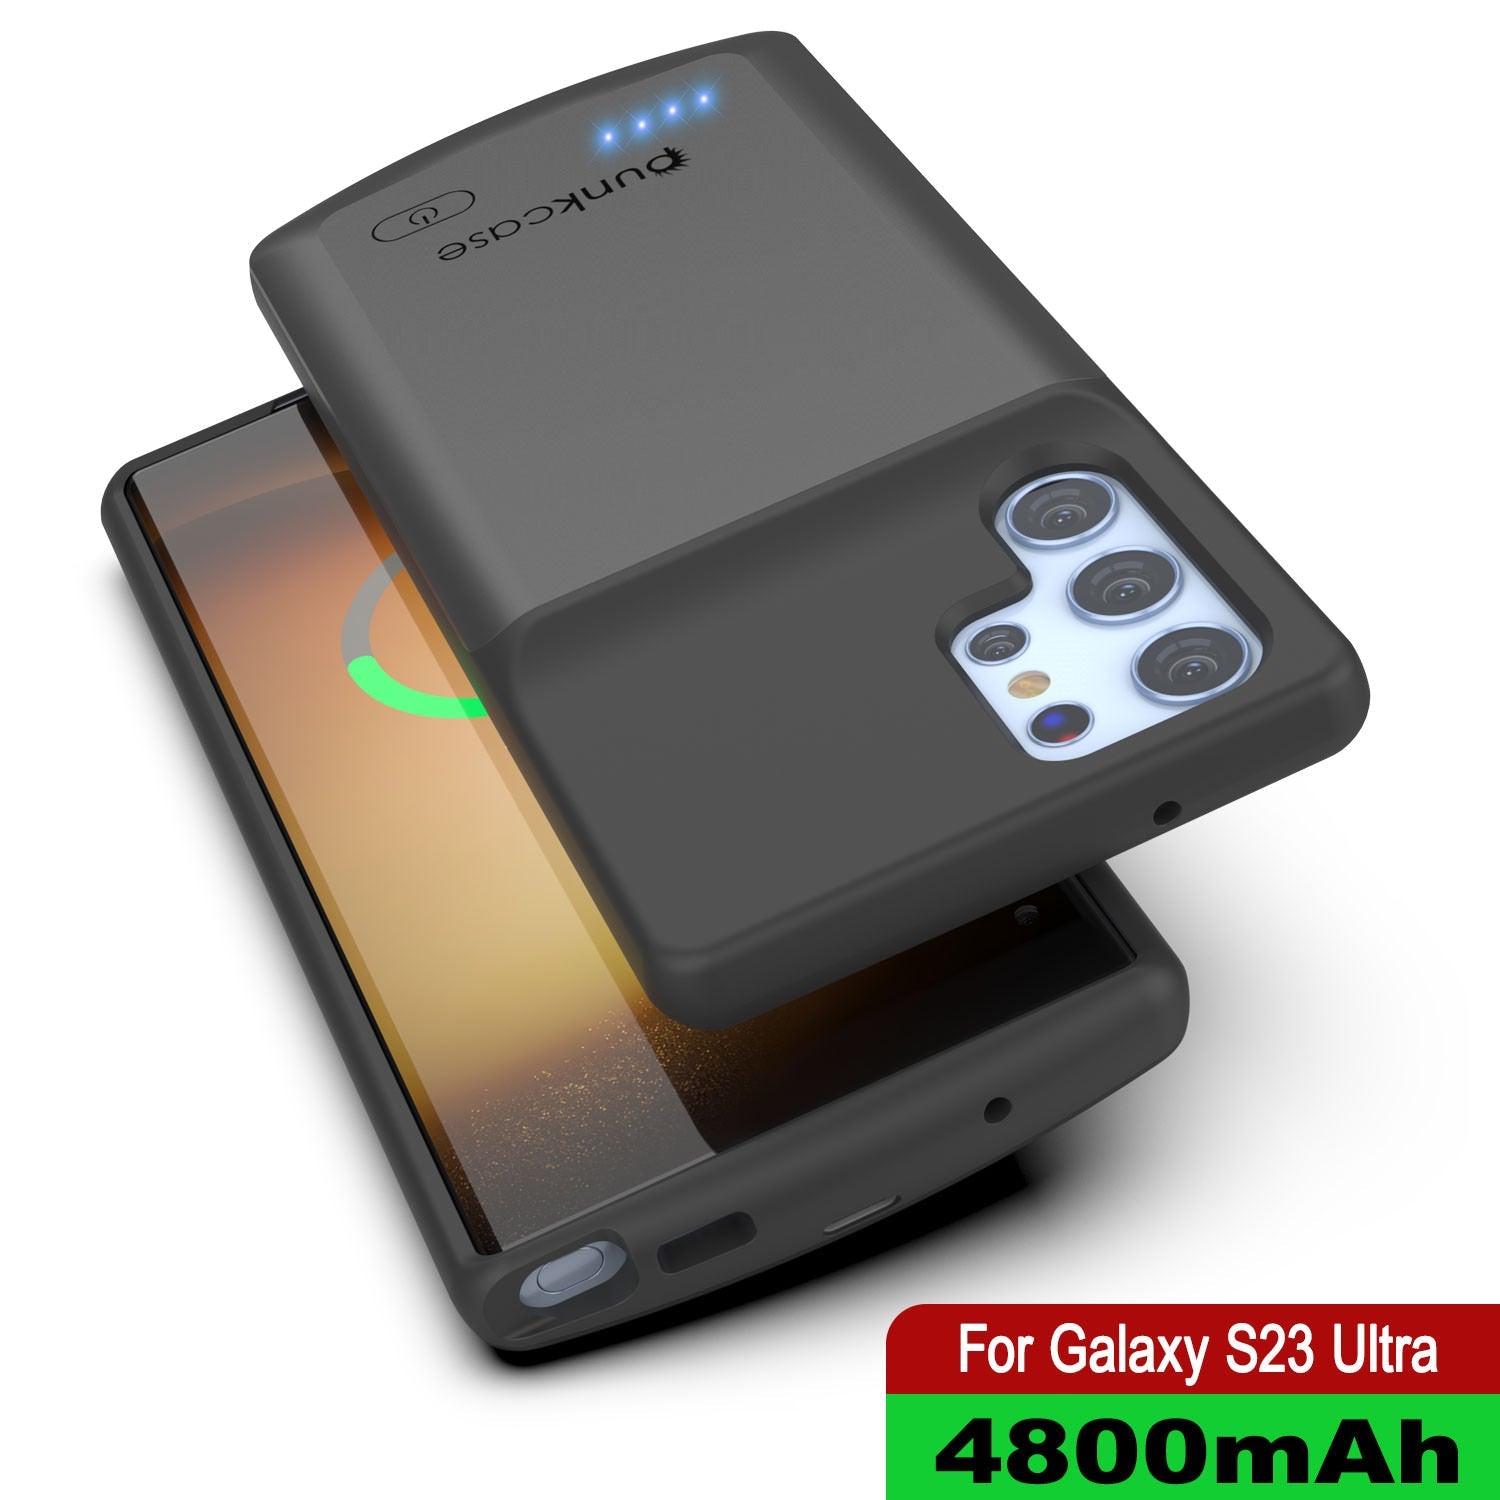 PunkJuice S23 Ultra Battery Case Grey - Portable Charging Power Juice Bank with 4800mAh